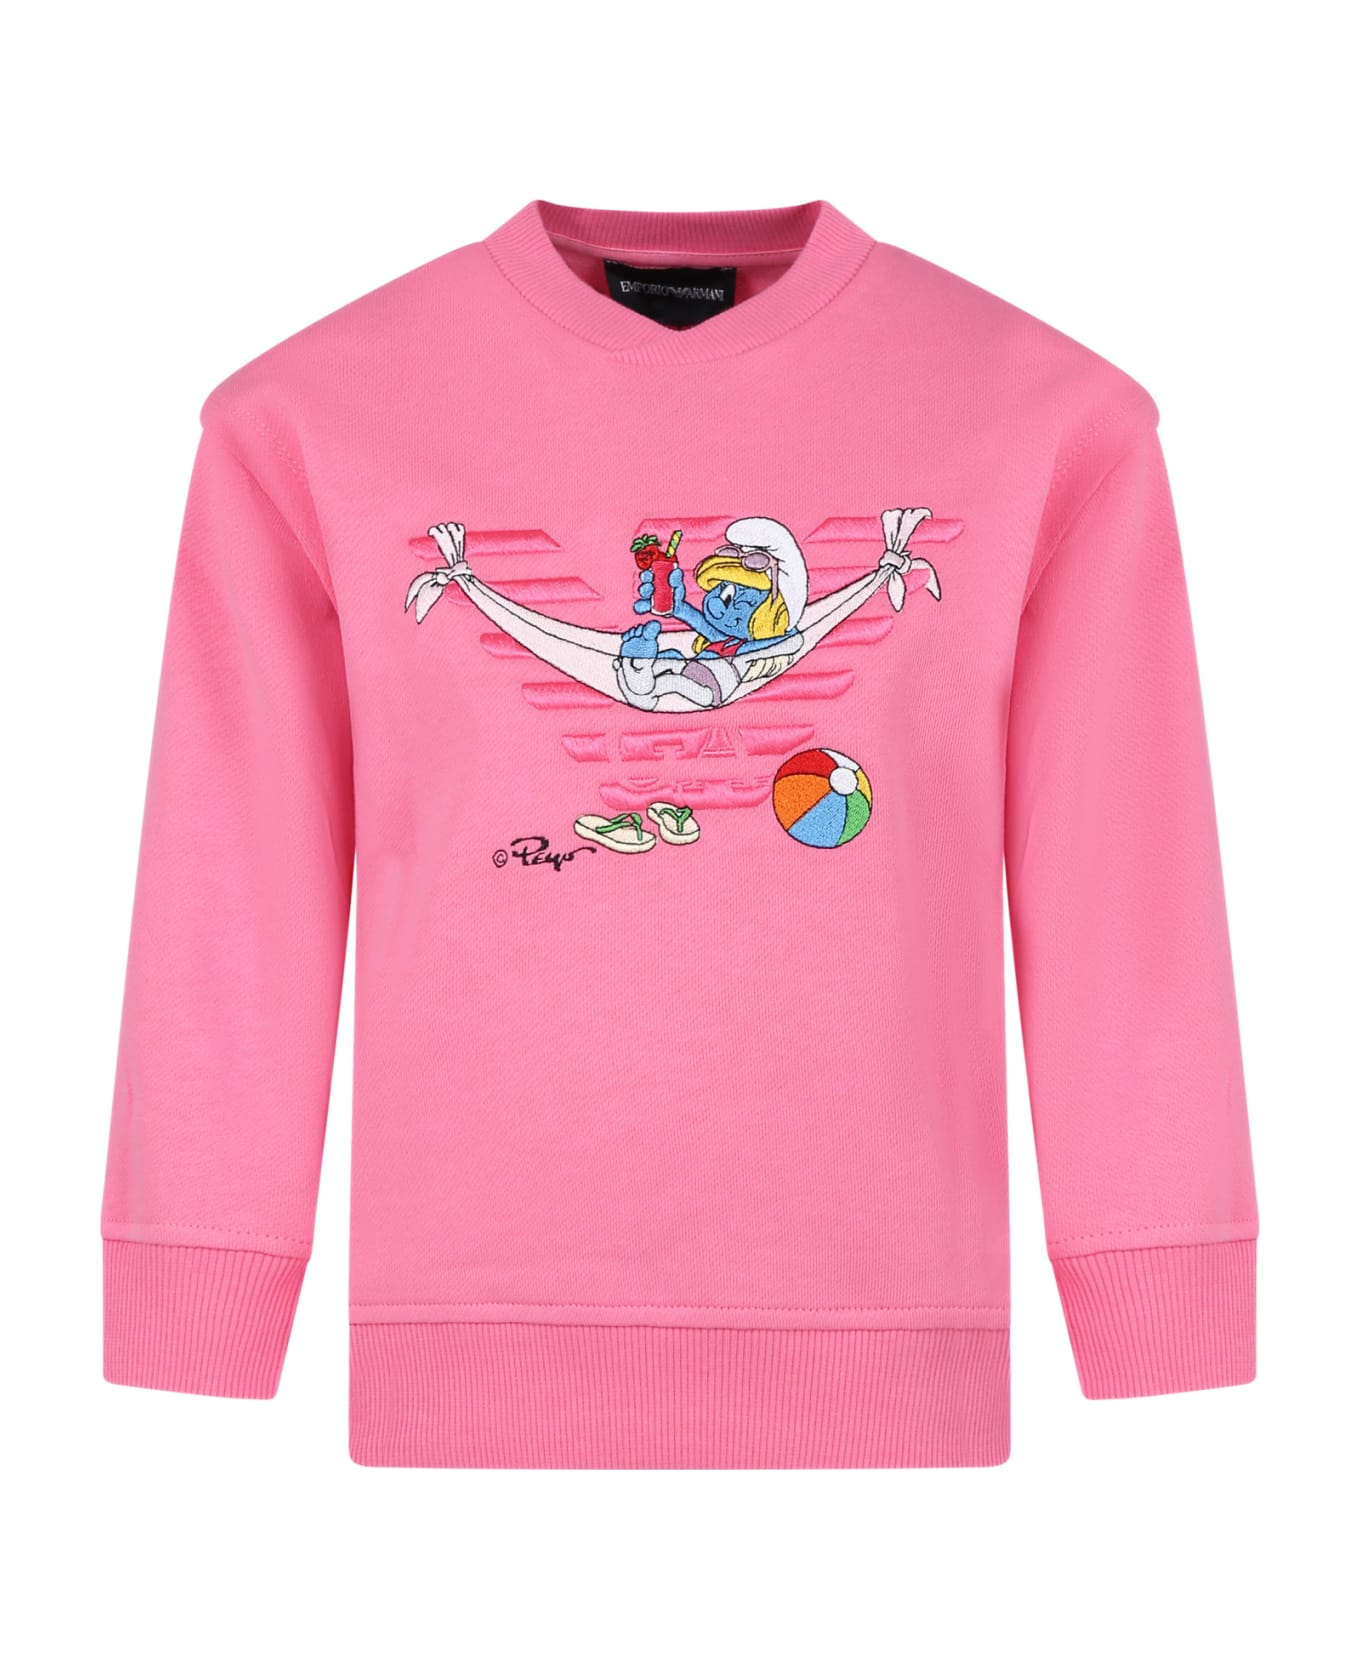 Emporio Armani Pink Sweatshirt For Girl With The Smurfs - Pink